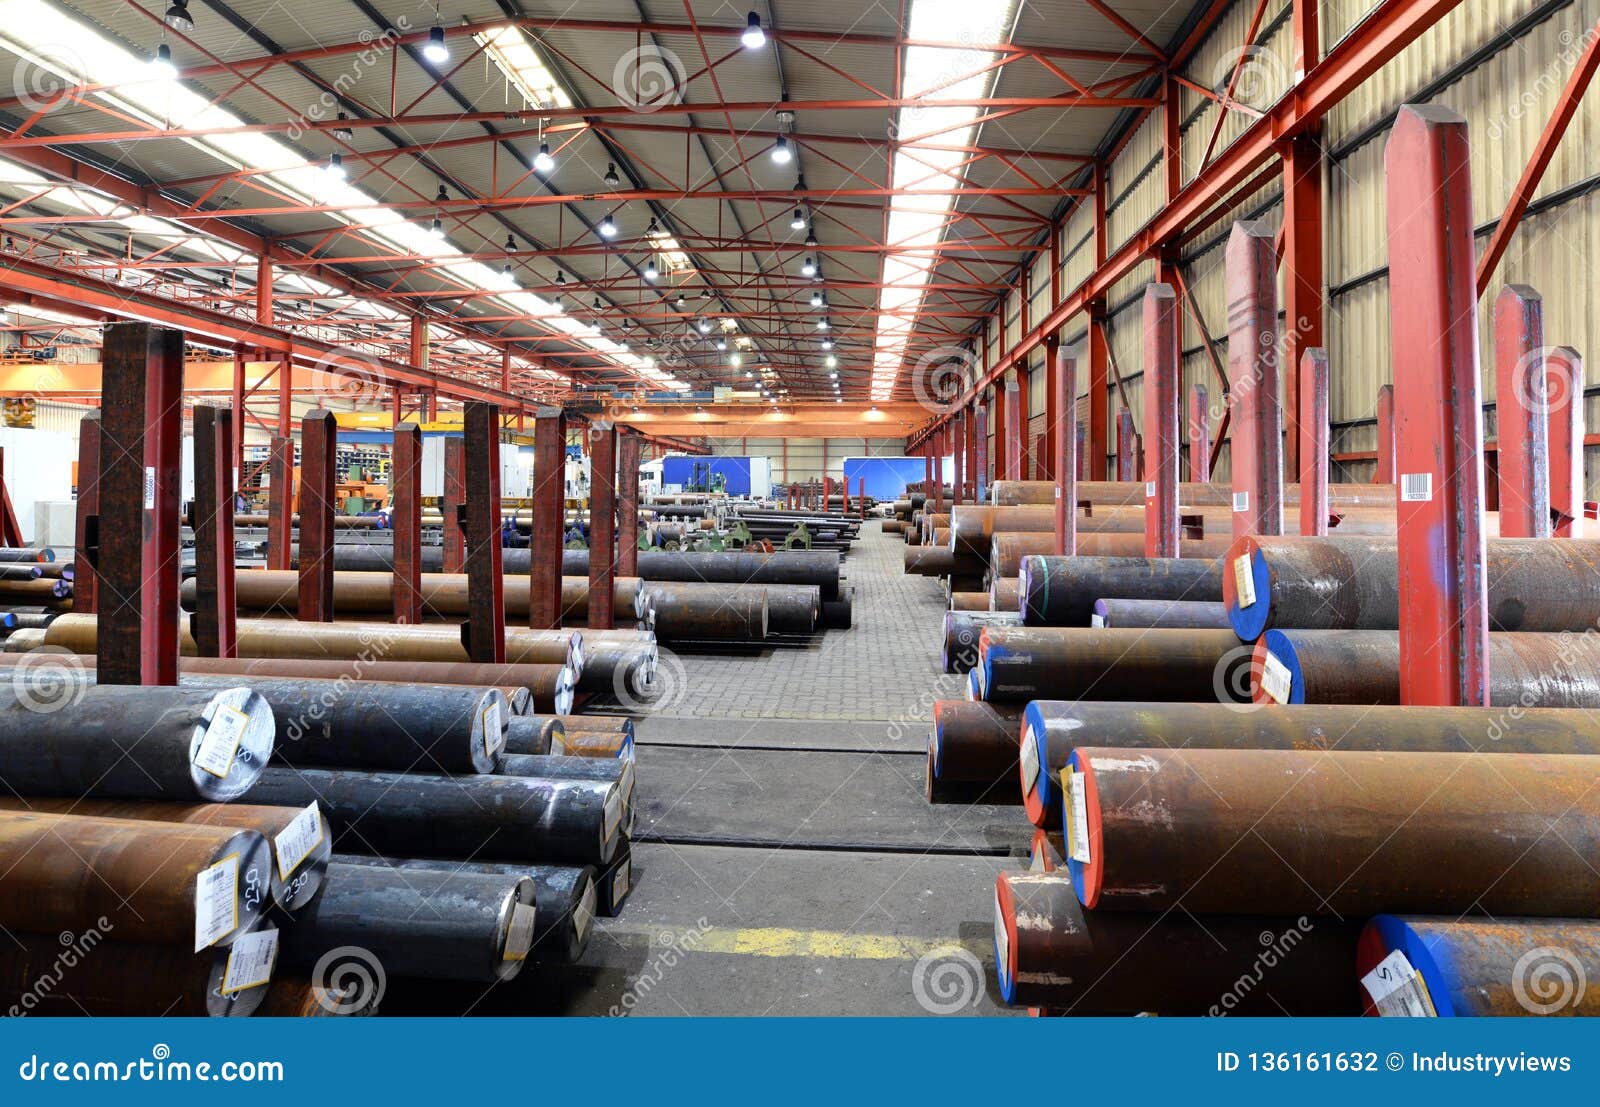 Sale and Storage of Industrial Goods and Steel in a Factory Hall Stock ...